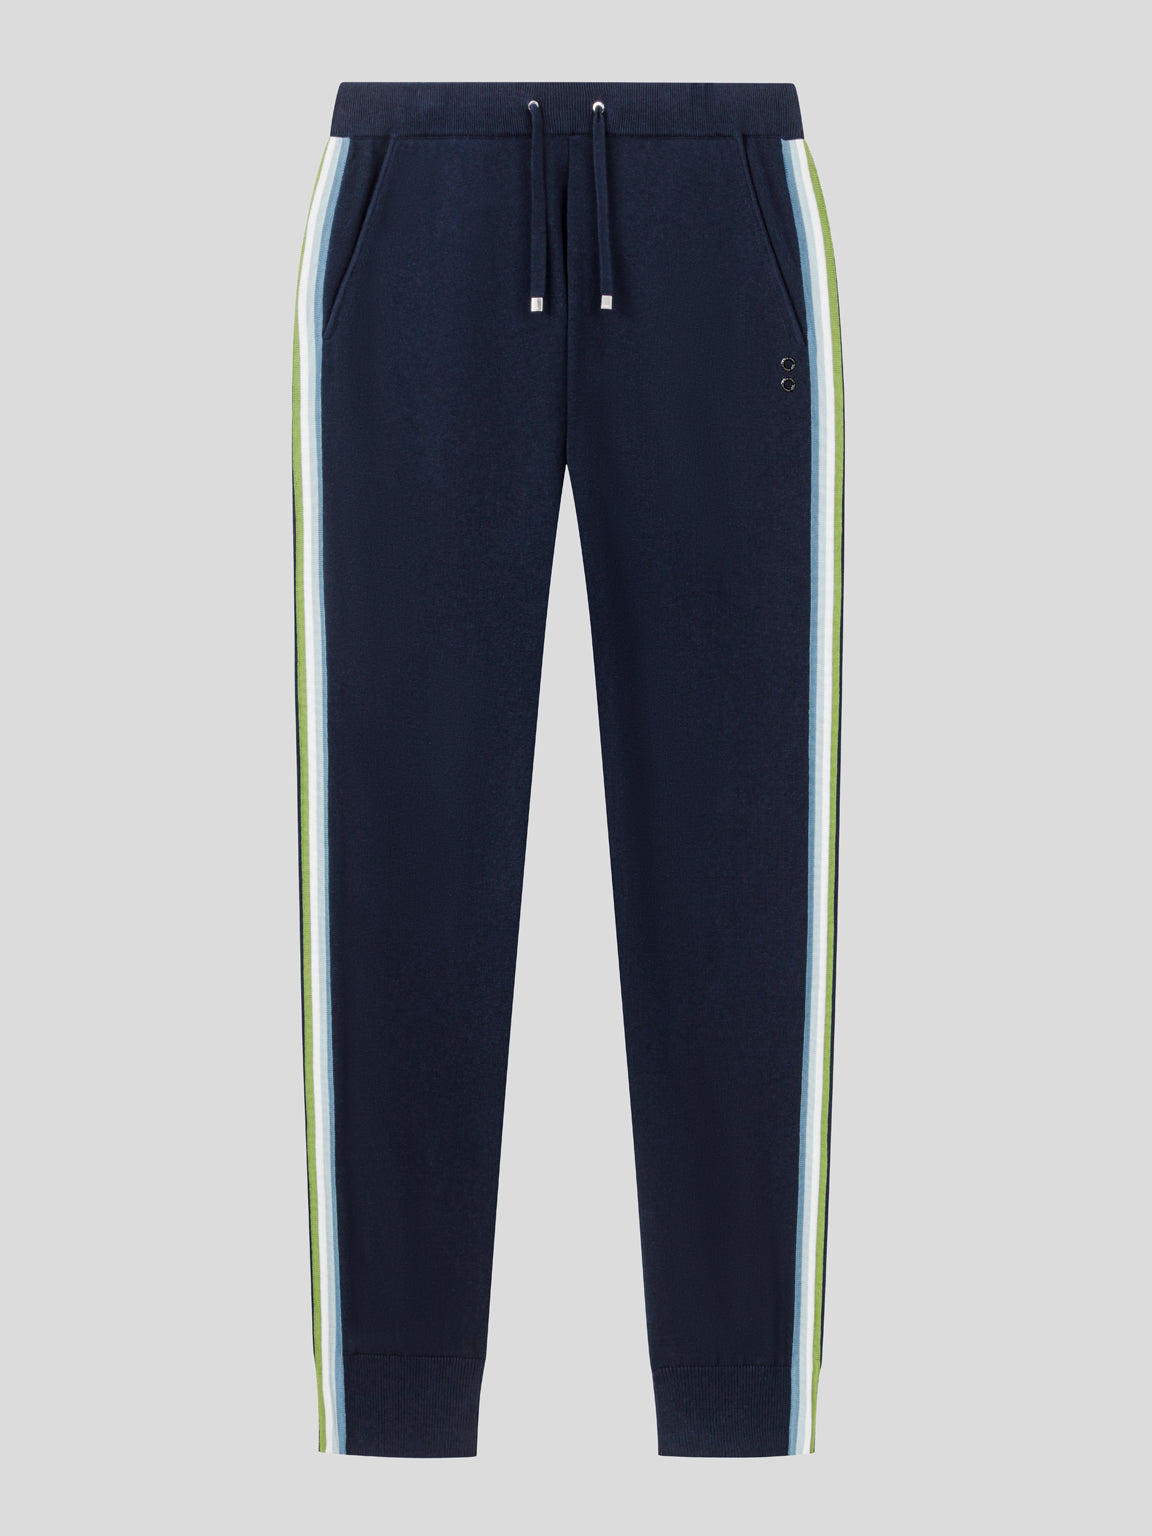 Cotton Cashmere Pants with Side Stripes: Navy/Green